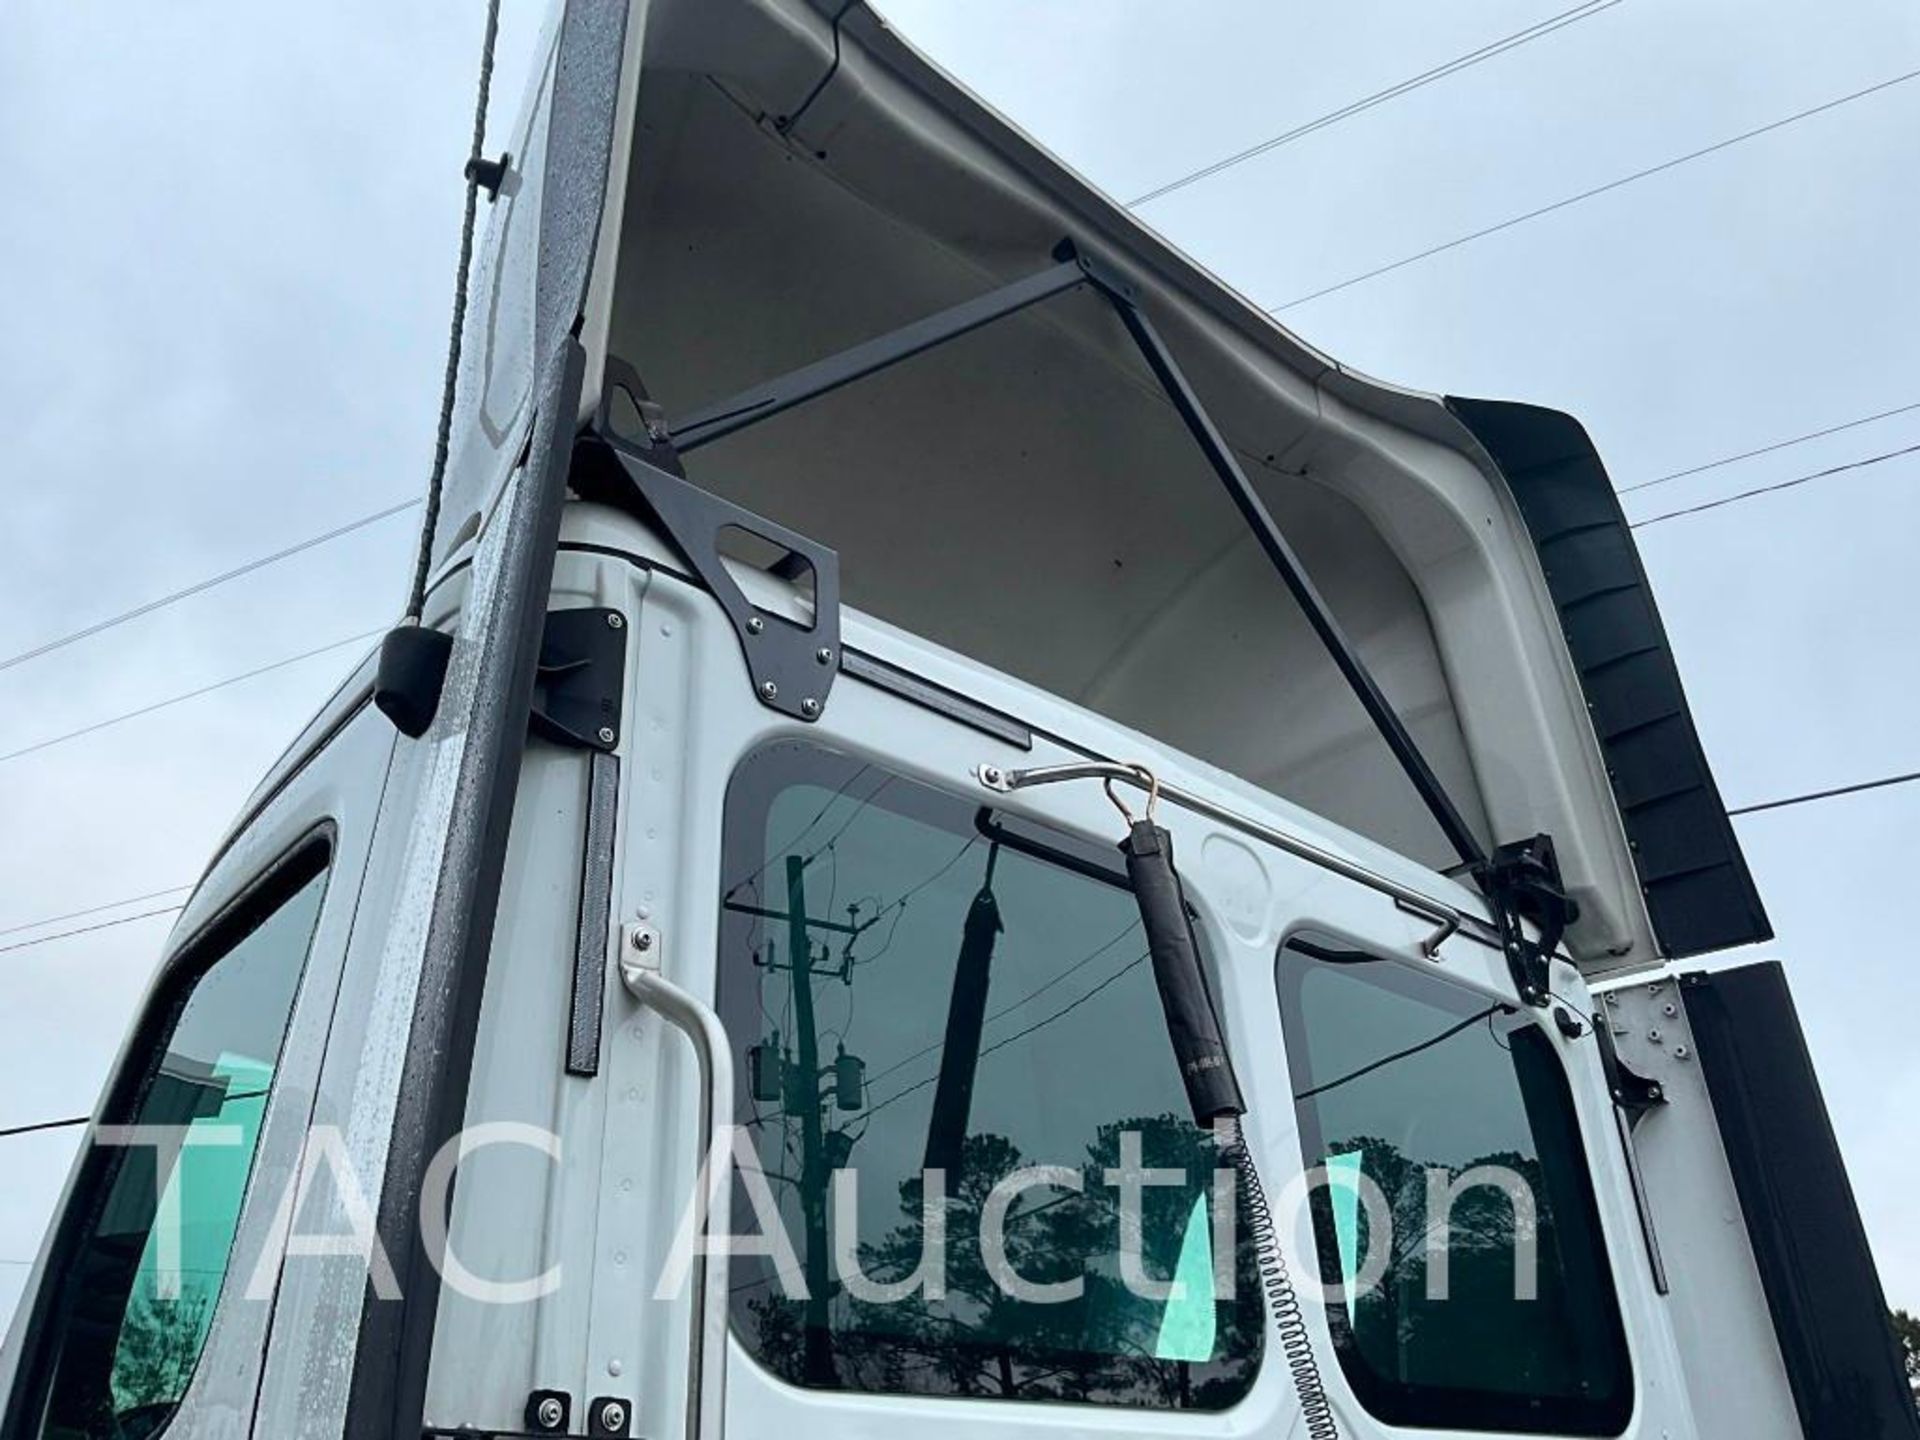 2019 Freightliner Cascadia Day Cab - Image 9 of 59